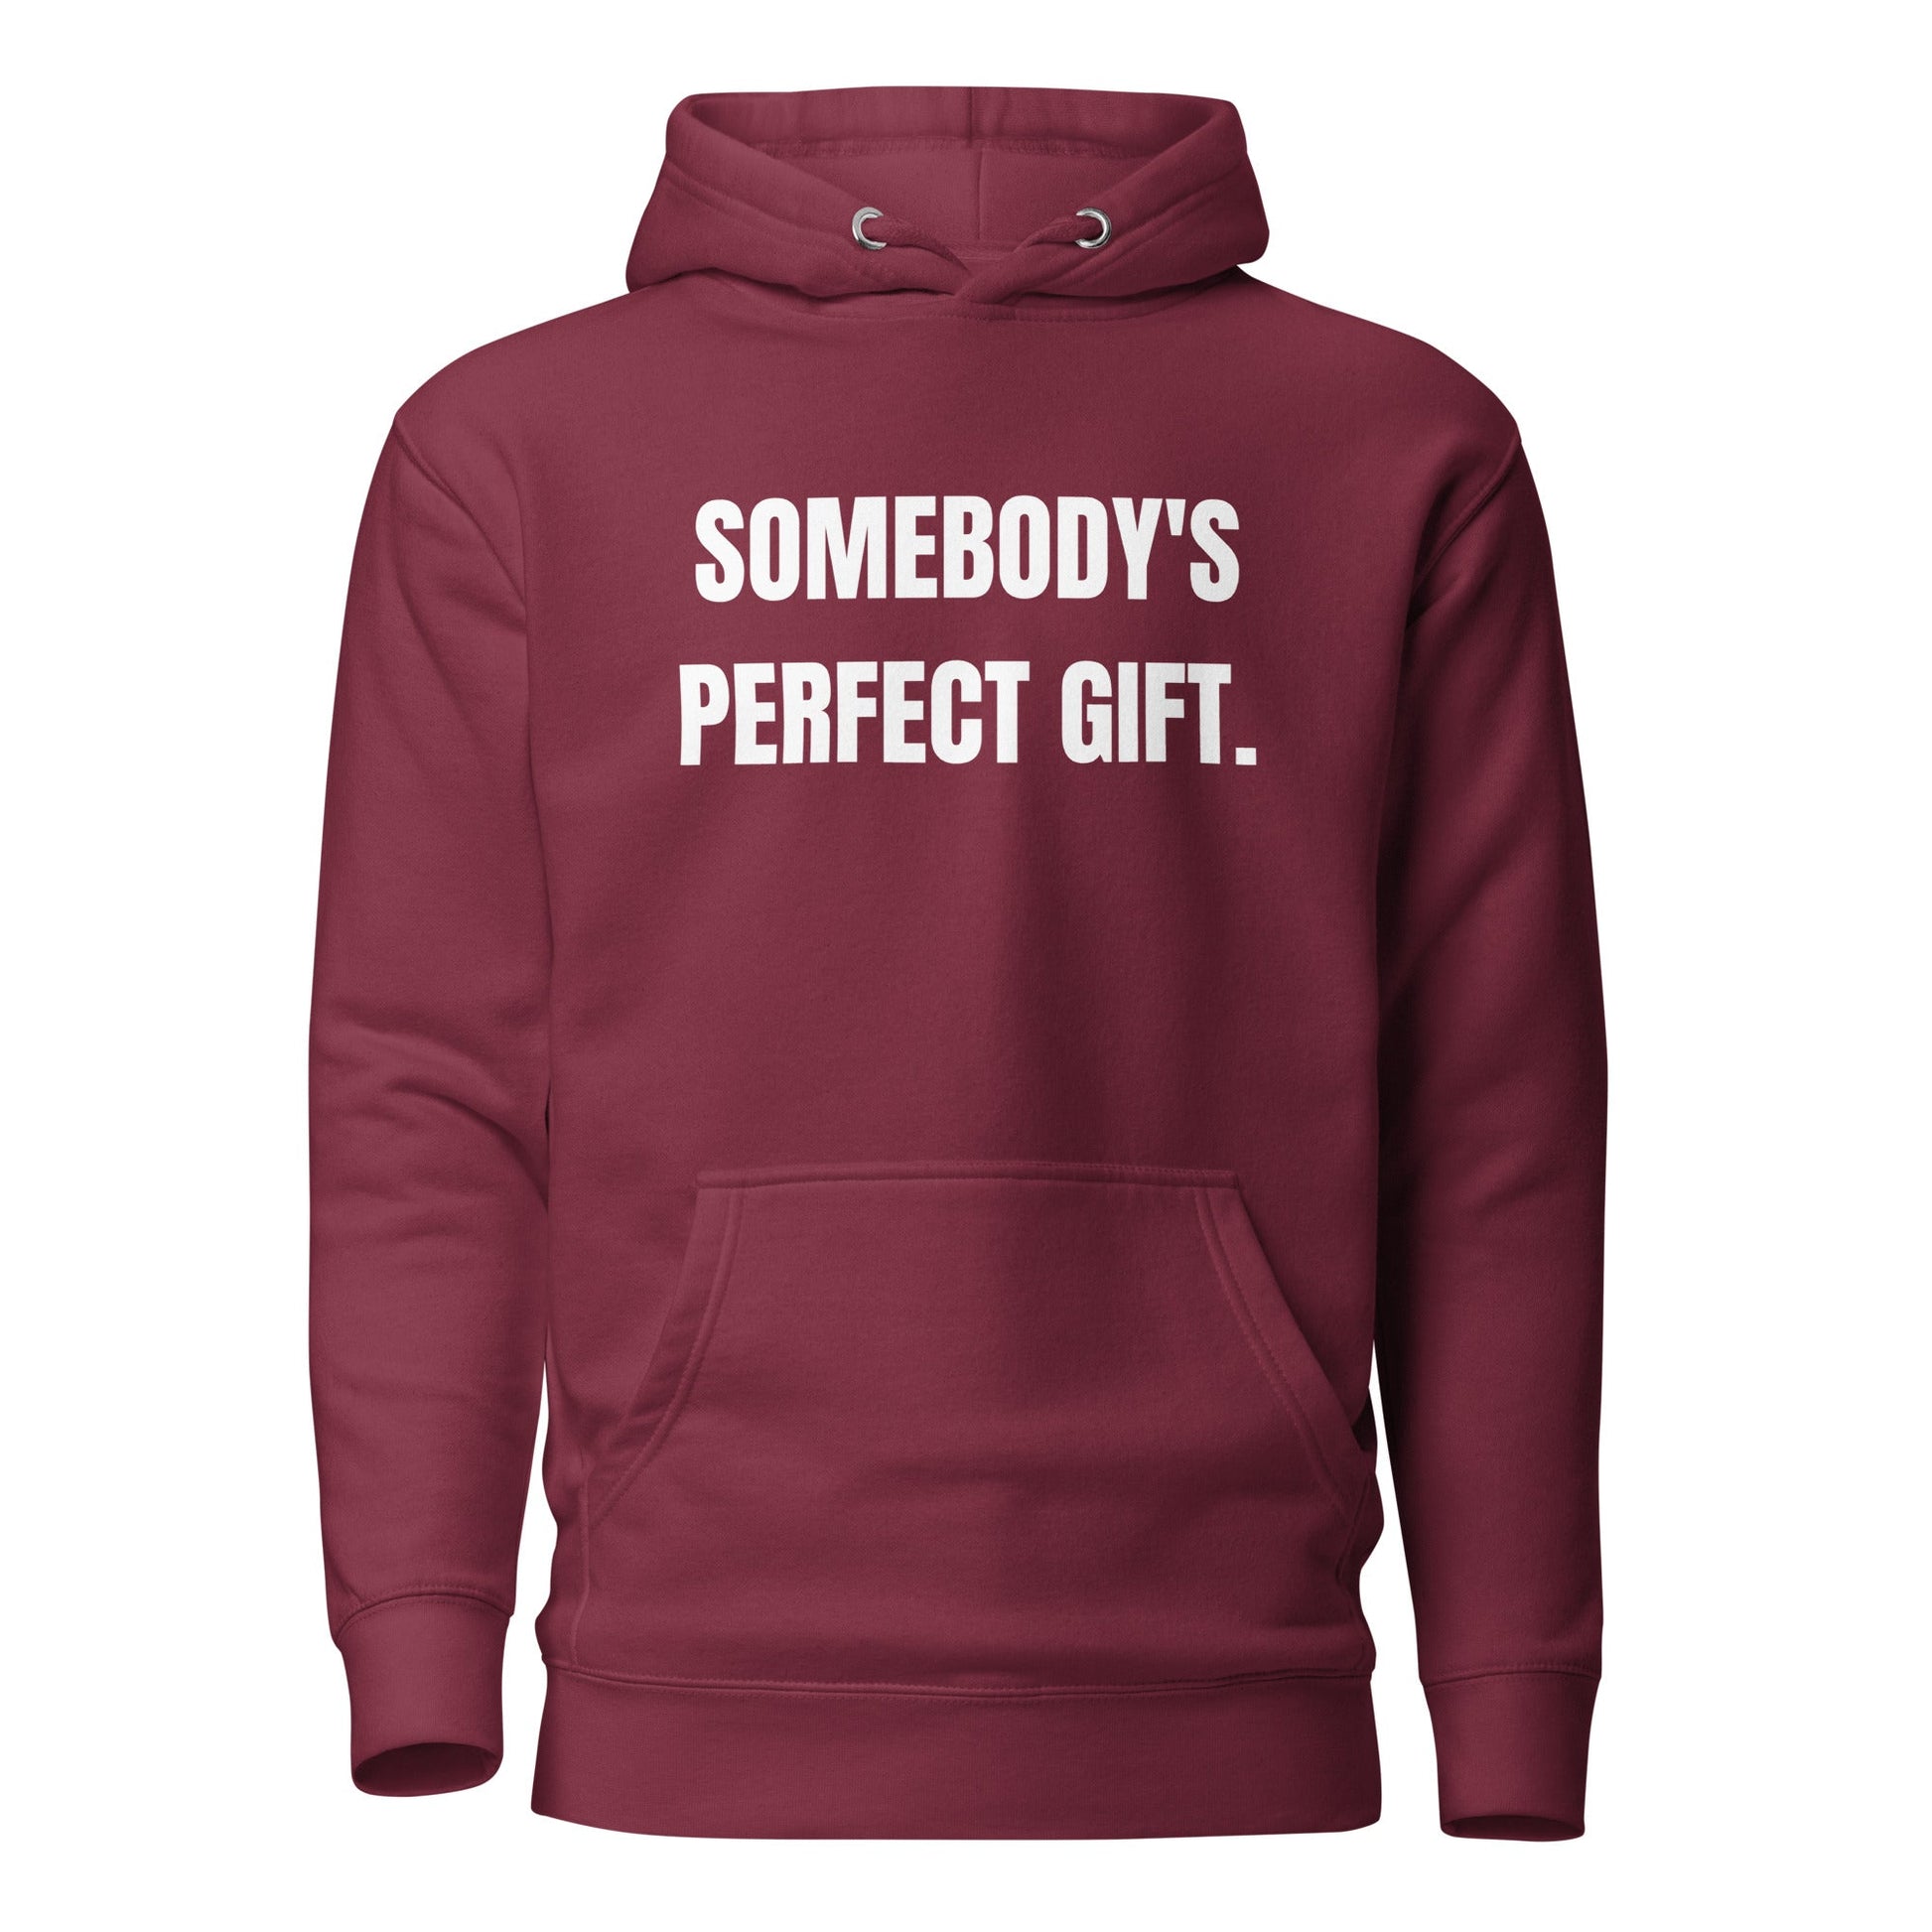 Somebody's perfect gift! Unisex Hoodie - Catch This Tea Shirts